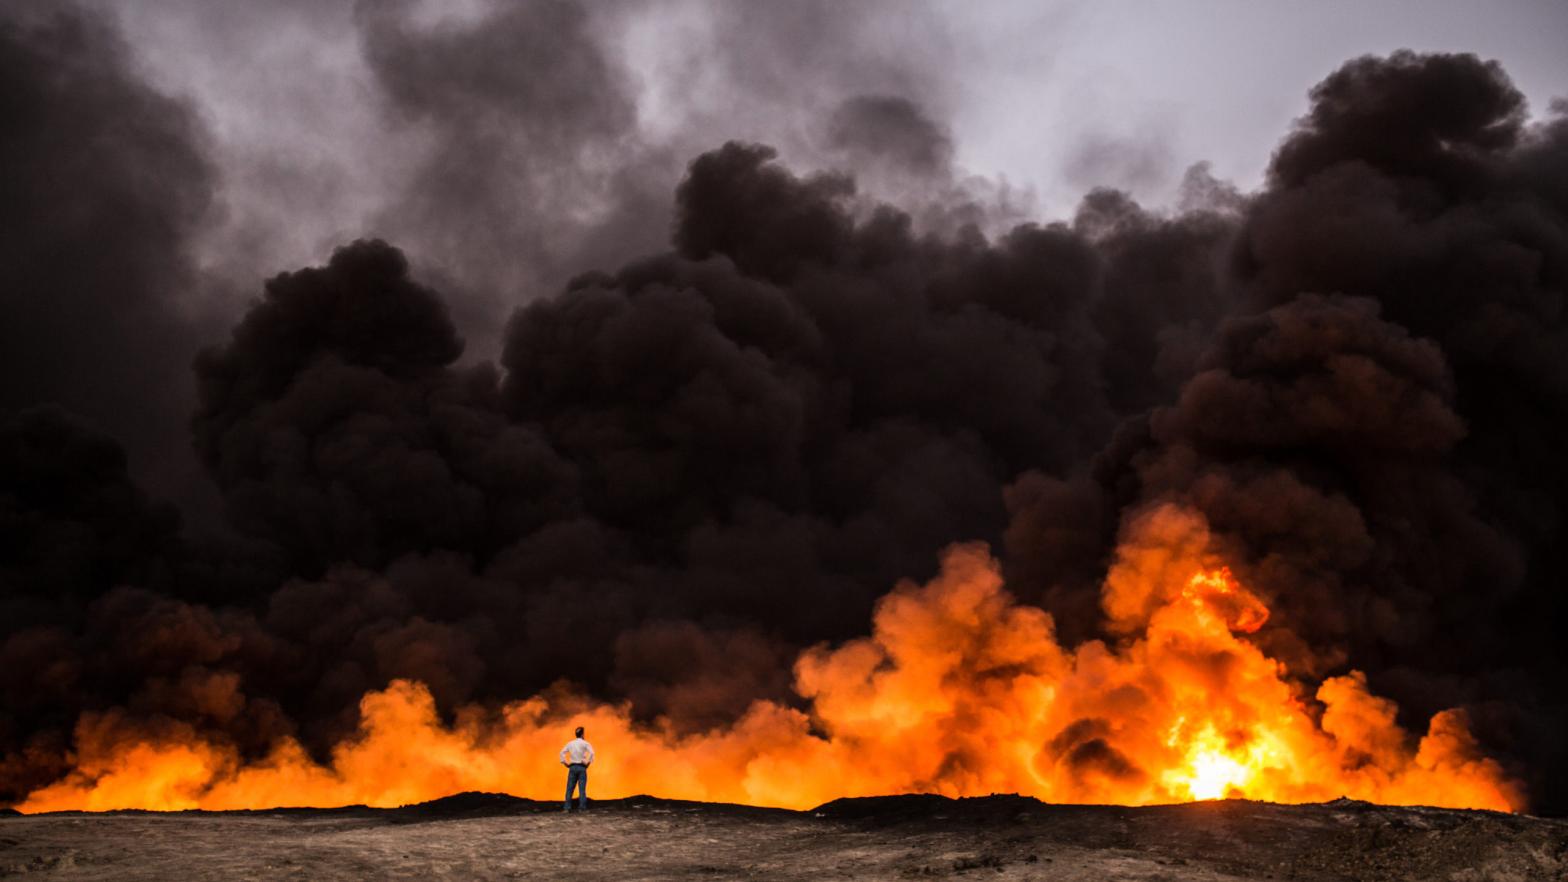 A man stands in front of a fire from oil that has been set ablaze in the Qayyarah area of Iraq. (Photo: Yasin Akgul/AFP, Getty Images)